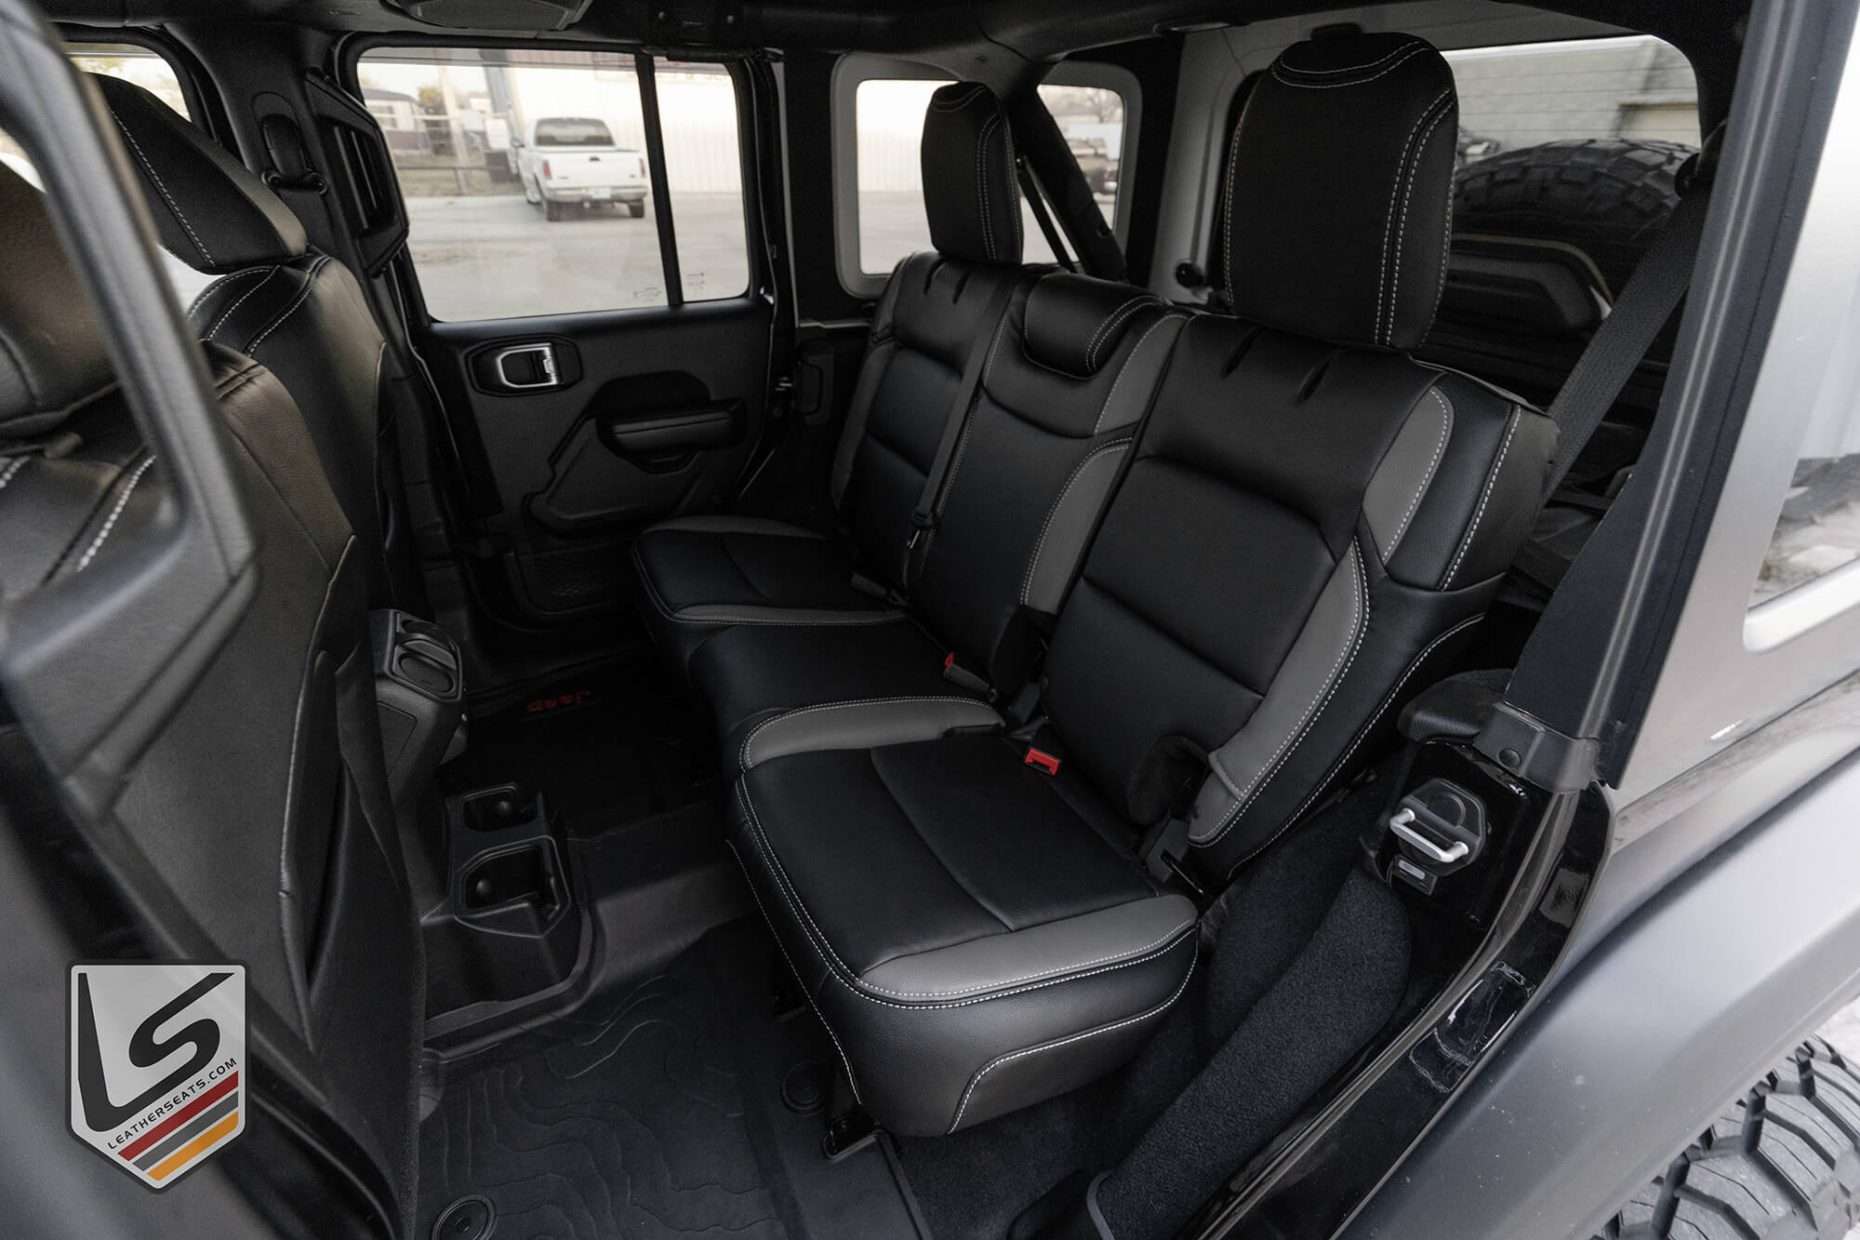 2018-2022 Jeep Wrangler JL installed Black and Light Grey leather seats - Rear seats from driver side